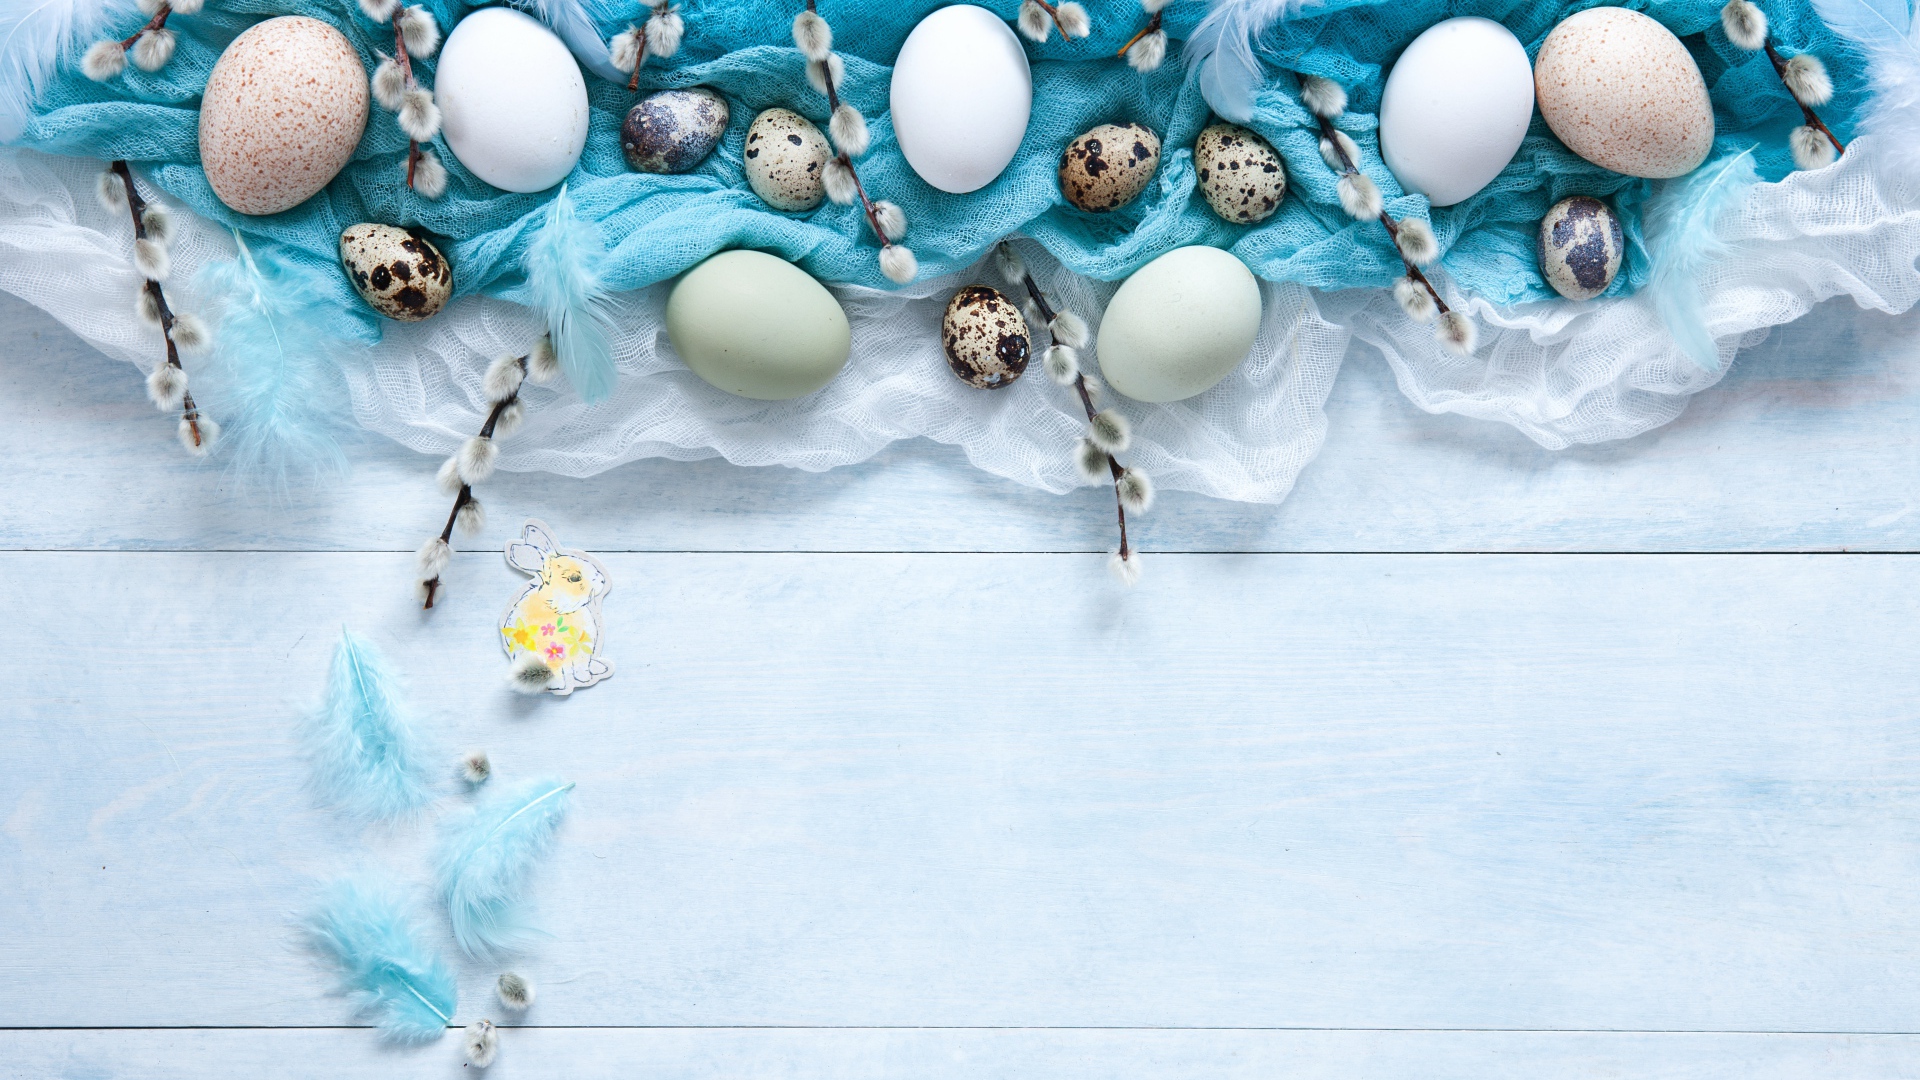 Eggs on fabric with willow branches on the table